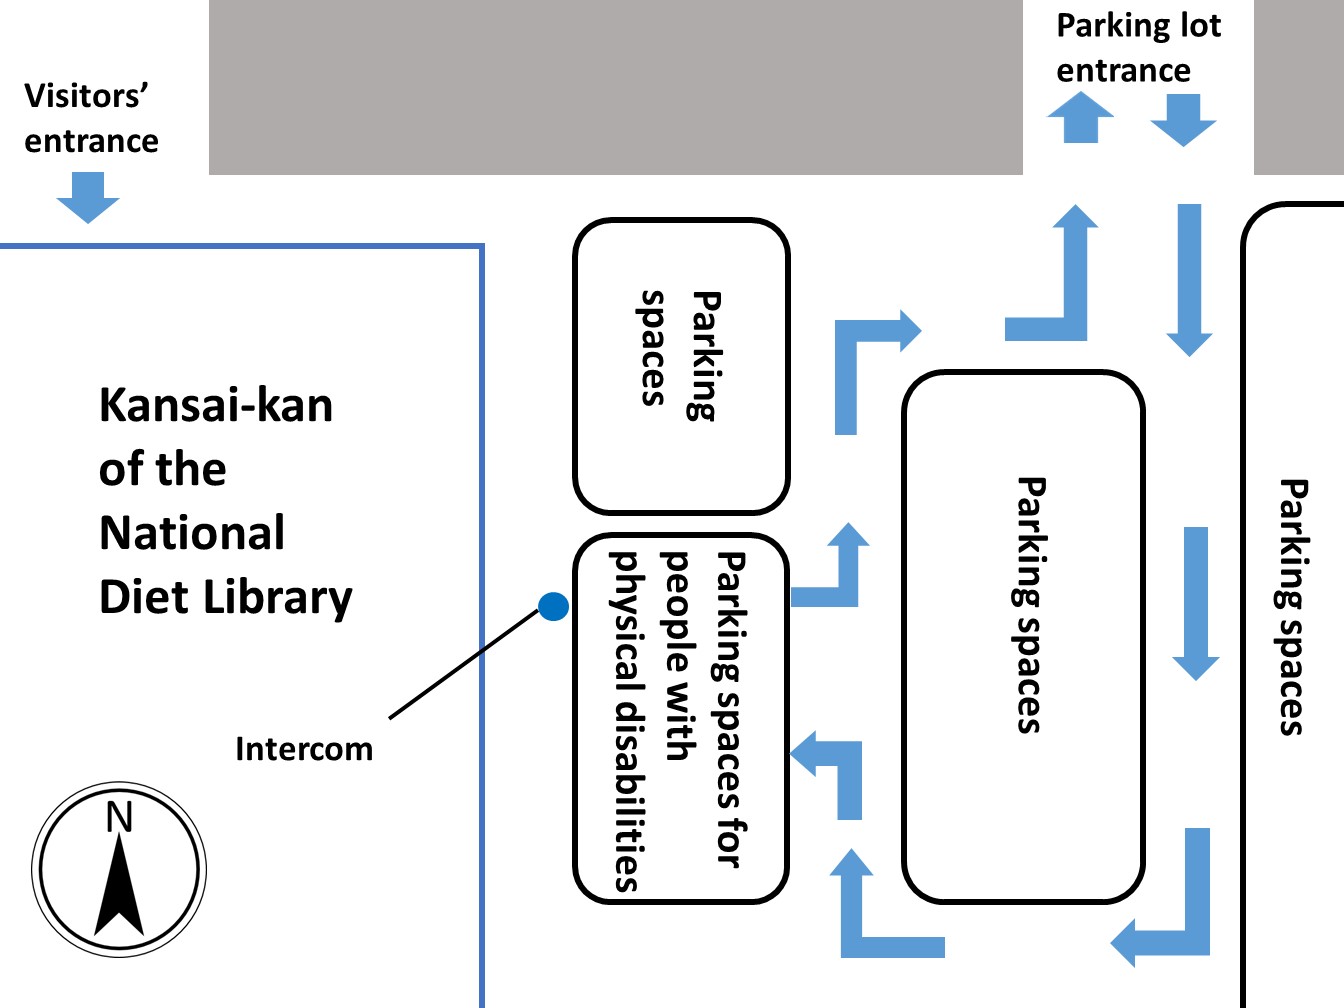 This is a map of the parking lot for users on the east side of the Kansai-kan of the National Diet Library. Parking spaces for people with physical disabilities are located on the west side of the parking lot. They are near the visitors entrance of the Kansai-kan. The Kansai-kan building is to the west of the parking spaces for people with physical disabilities.